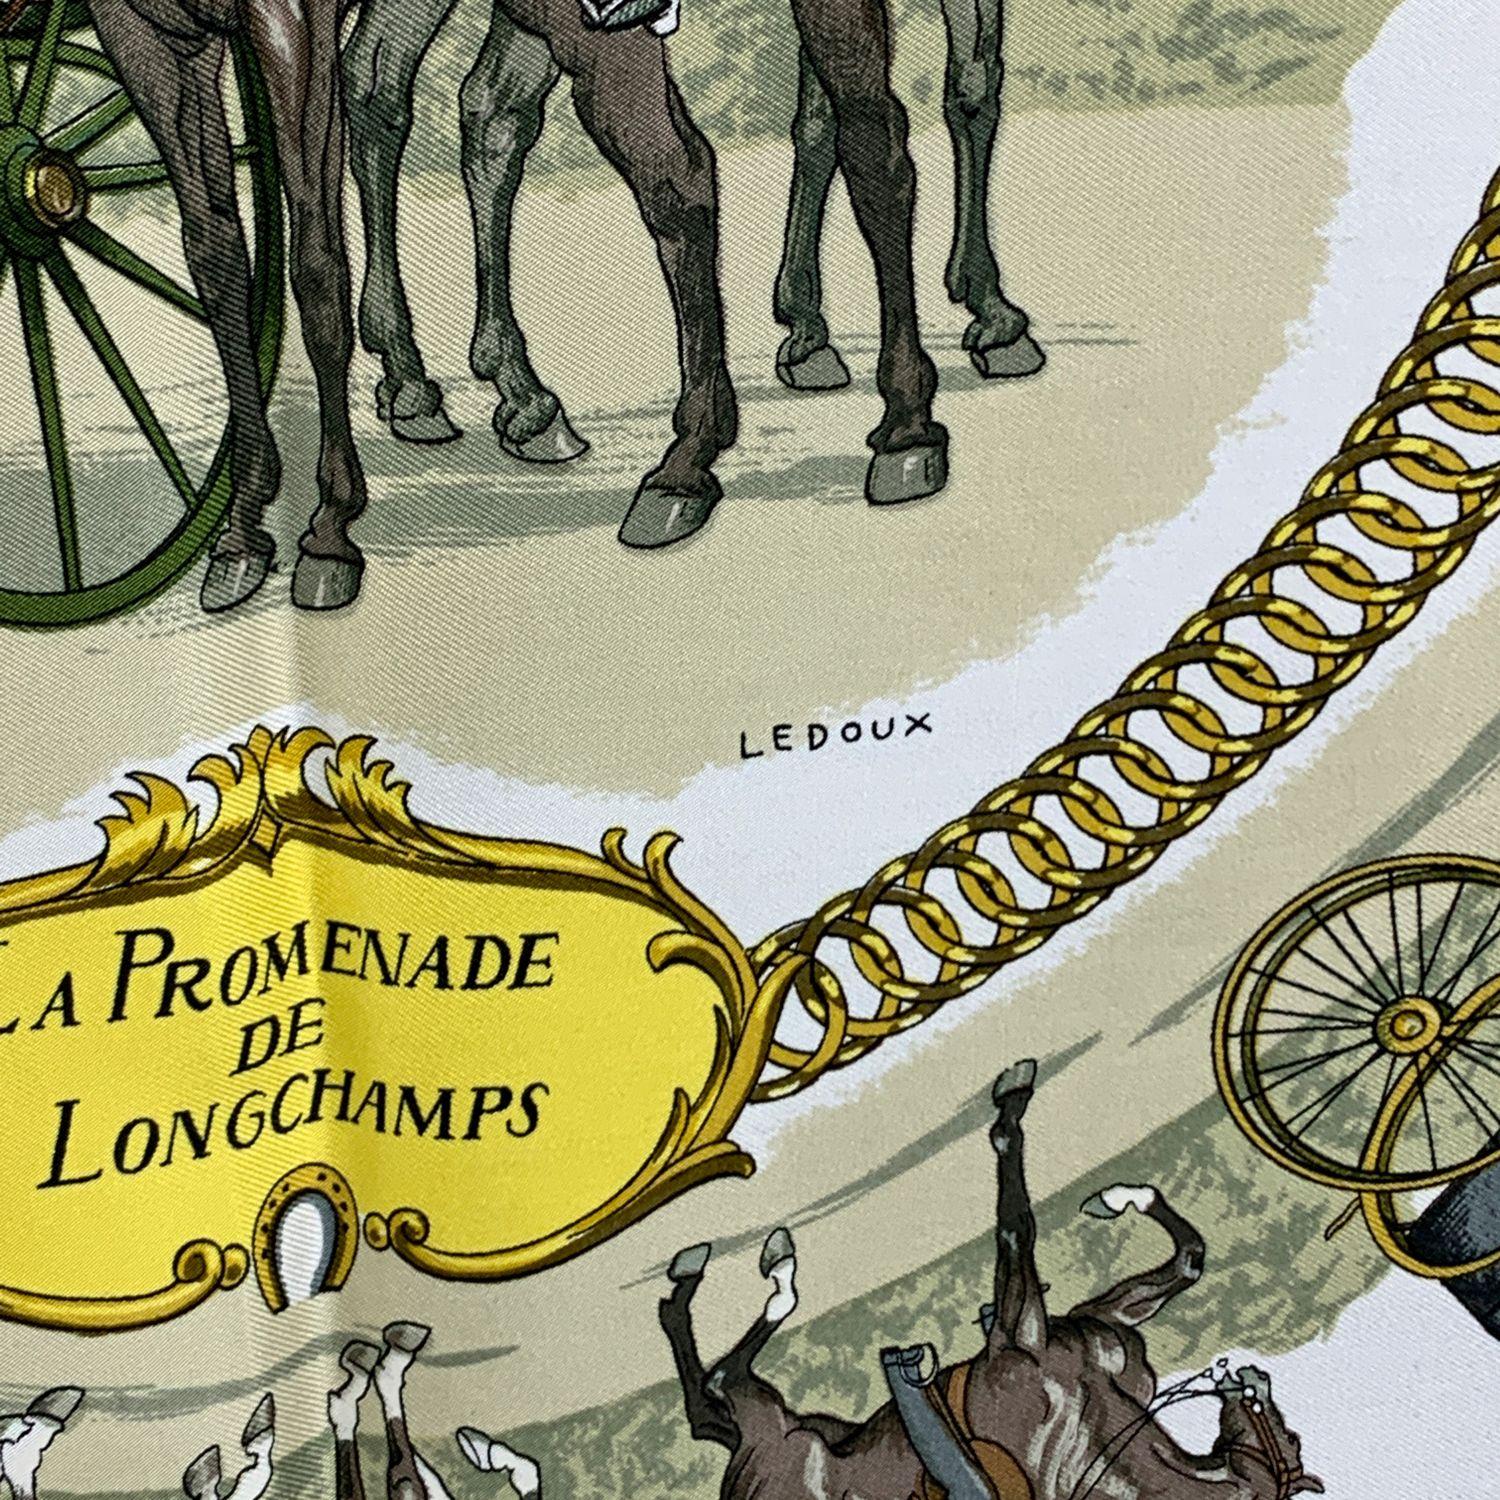 Vintage HERMES Silk scarf named 'La promenade de Longchamps' by Phippe Ledoux. First issued in 1965 and reissued 1970, 1975, 1980, 1986, 1999, 2002. The Scarf depicts women and men on horse and carriages. The border of the scarf is in green color.